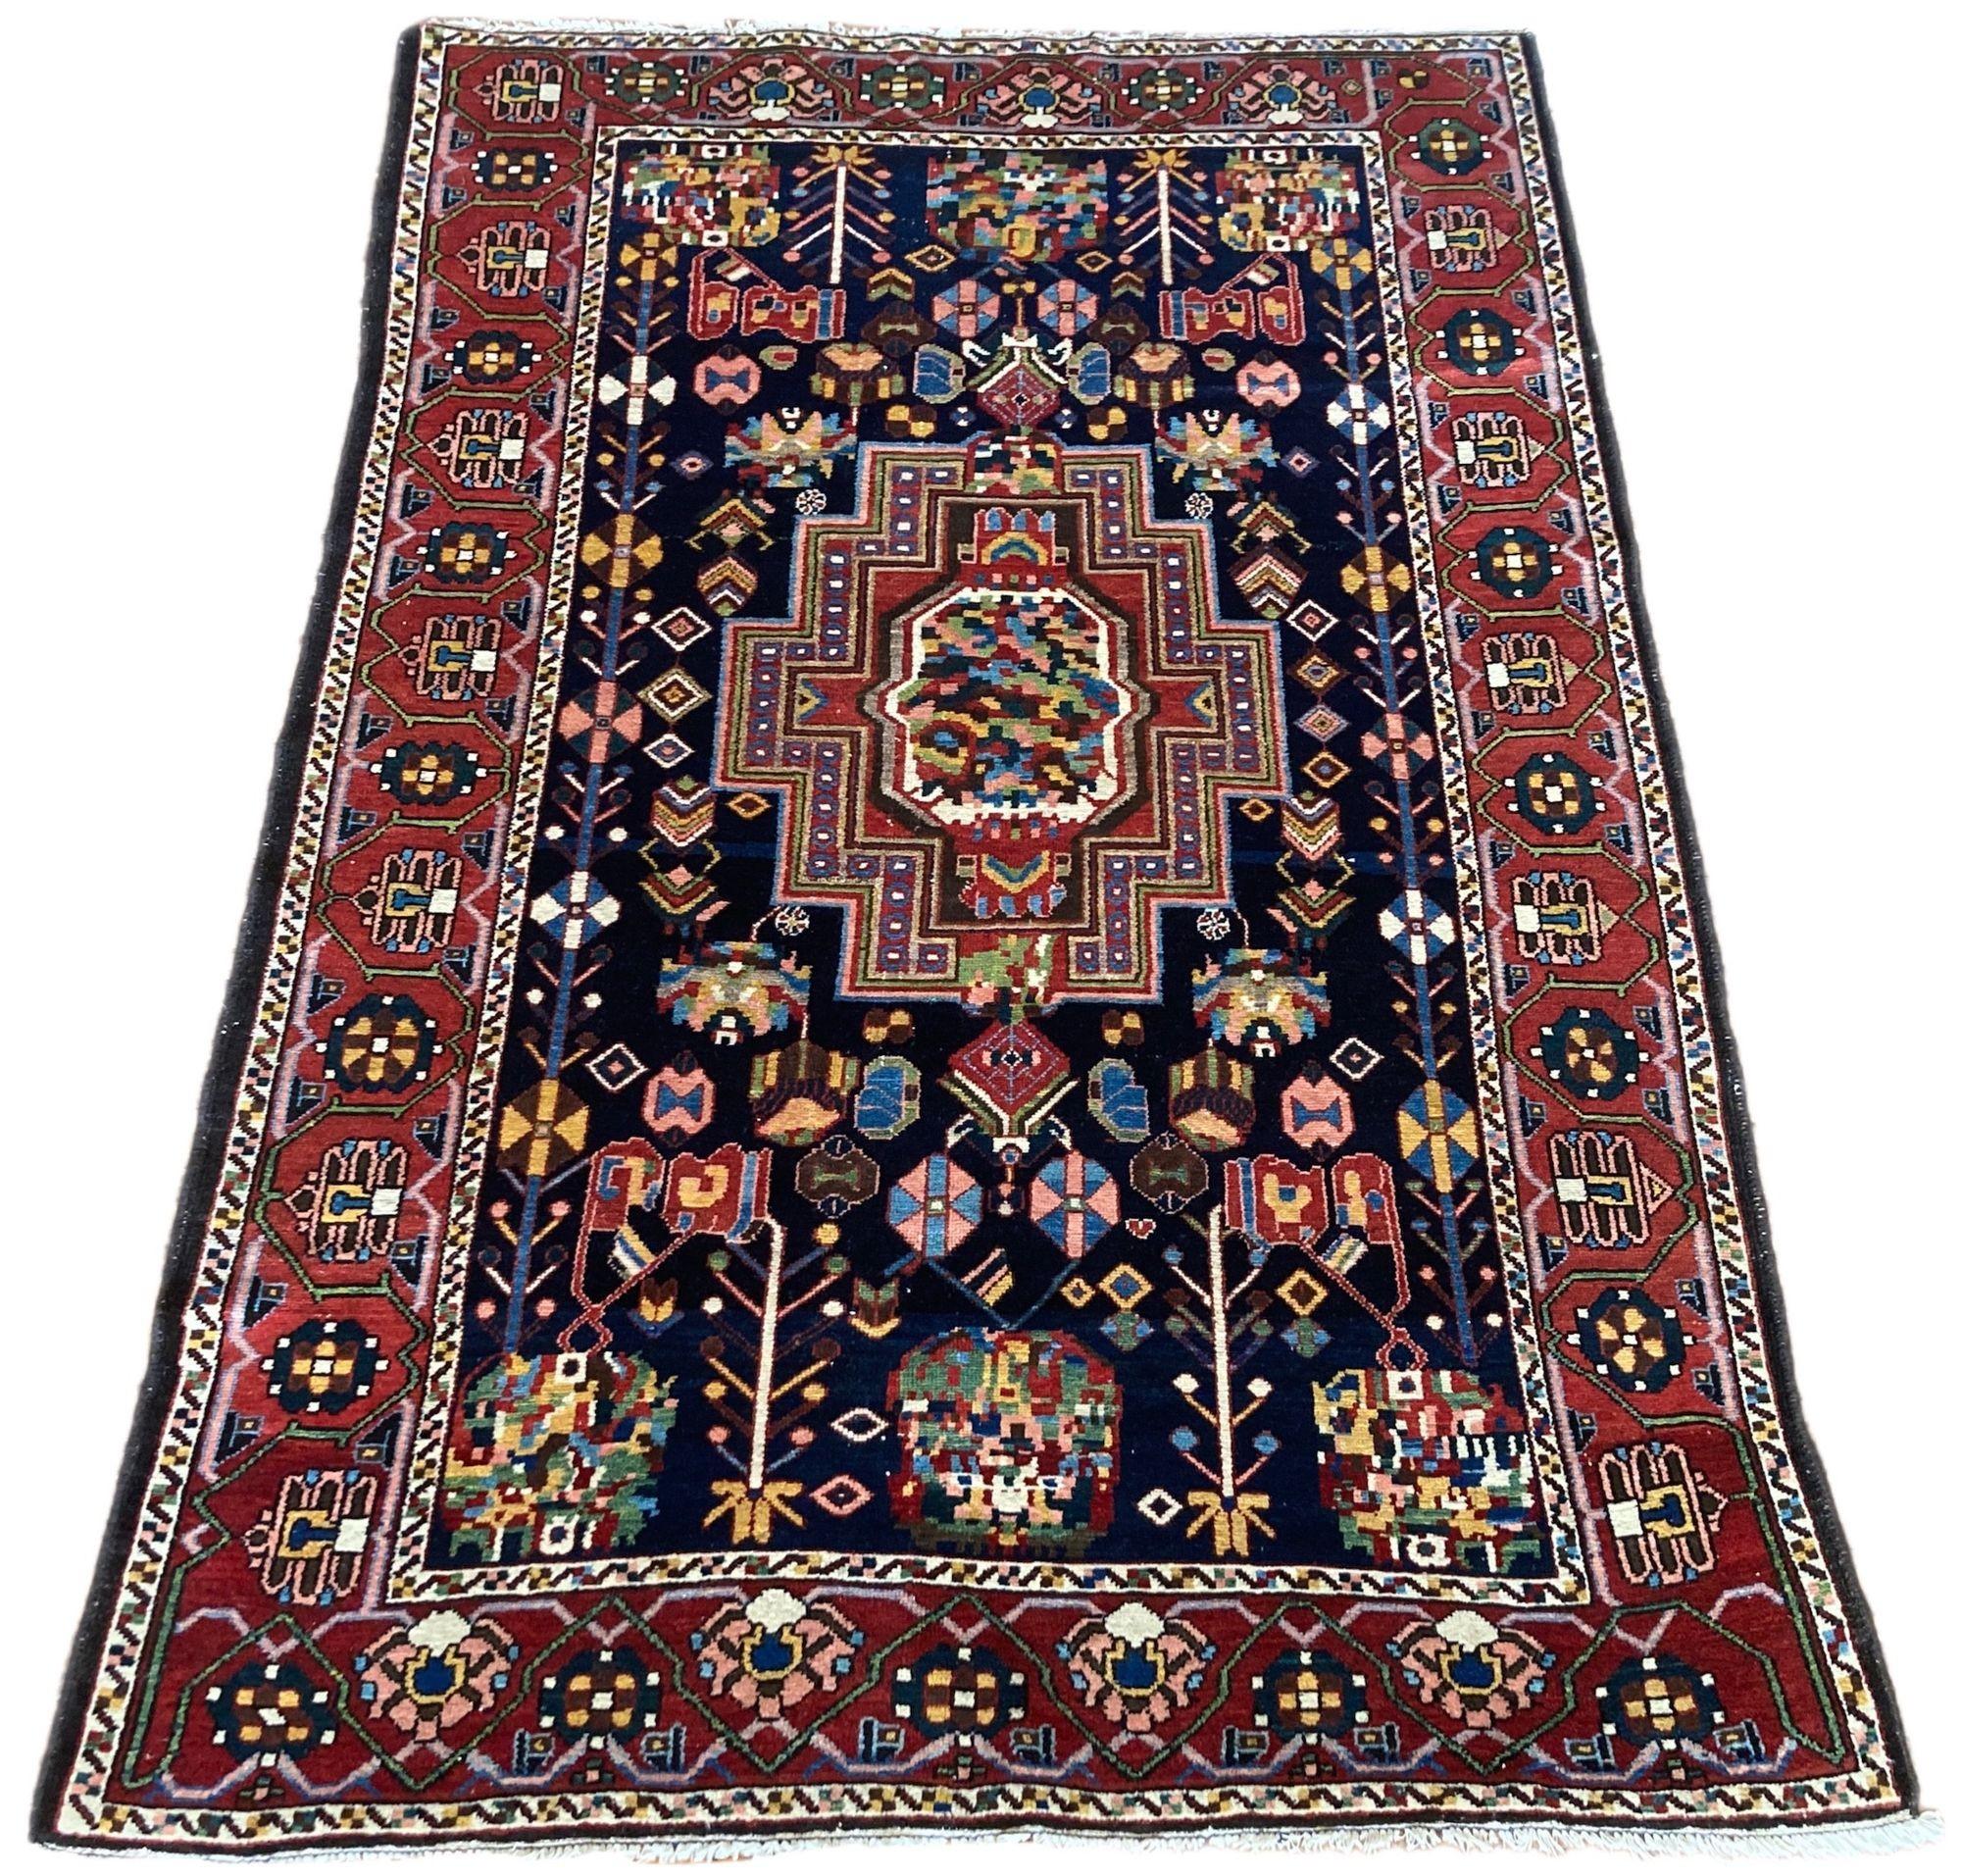 A beautiful antique Bakhtiar rug, hand woven circa 1910 with a single medallion floral design on a deep indigo field and terracotta border. Wonderful secondary colours of pinks, greens and golds and a highly decorative rug. The rug is slightly